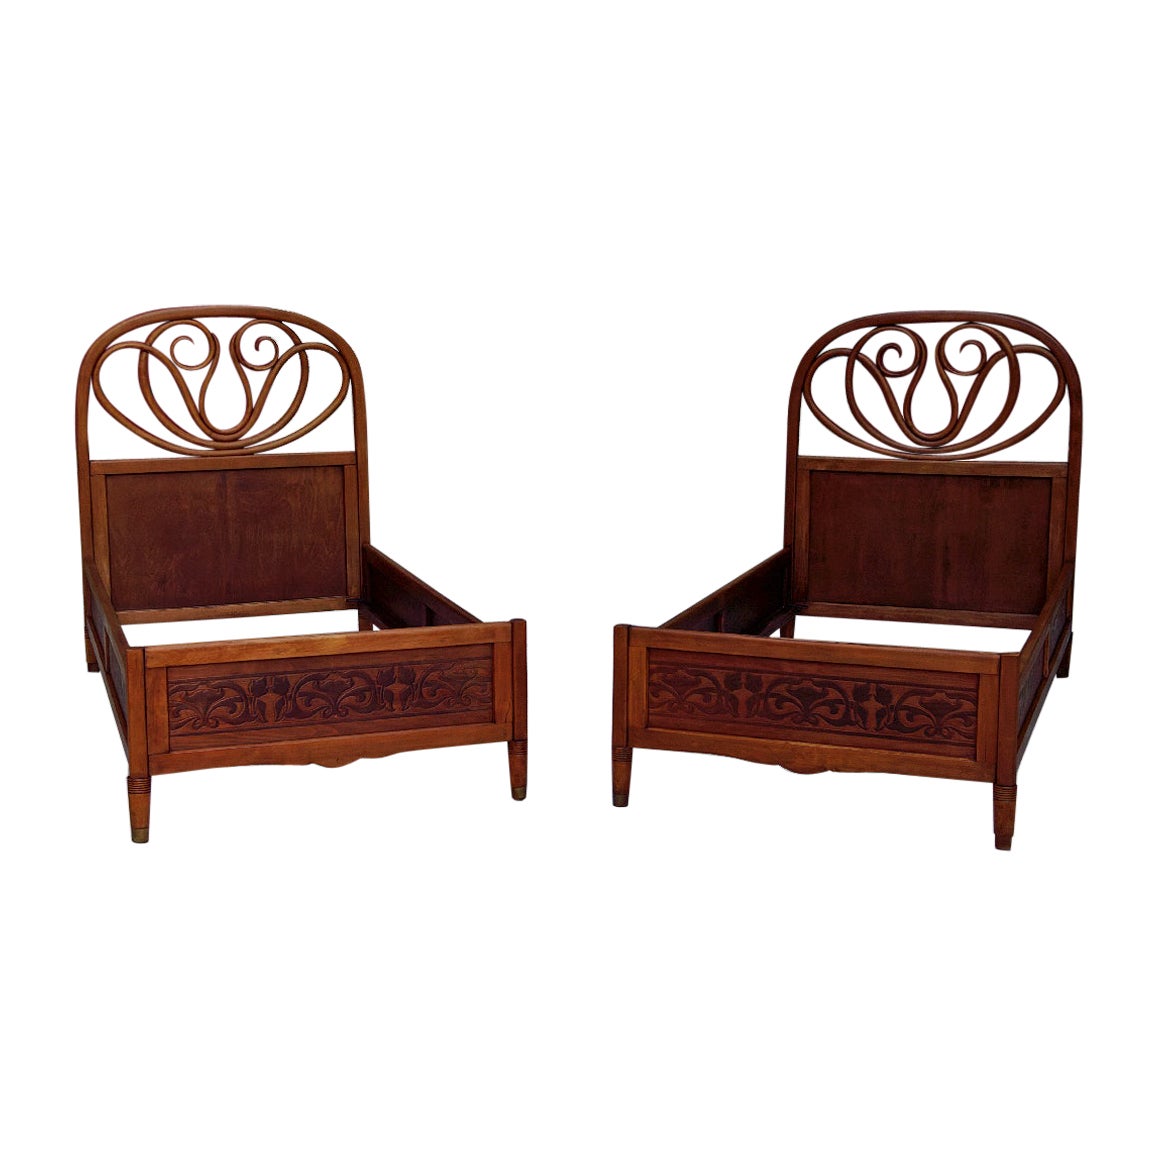 Pair of Bentwood Beds by Thonet, circa 1900